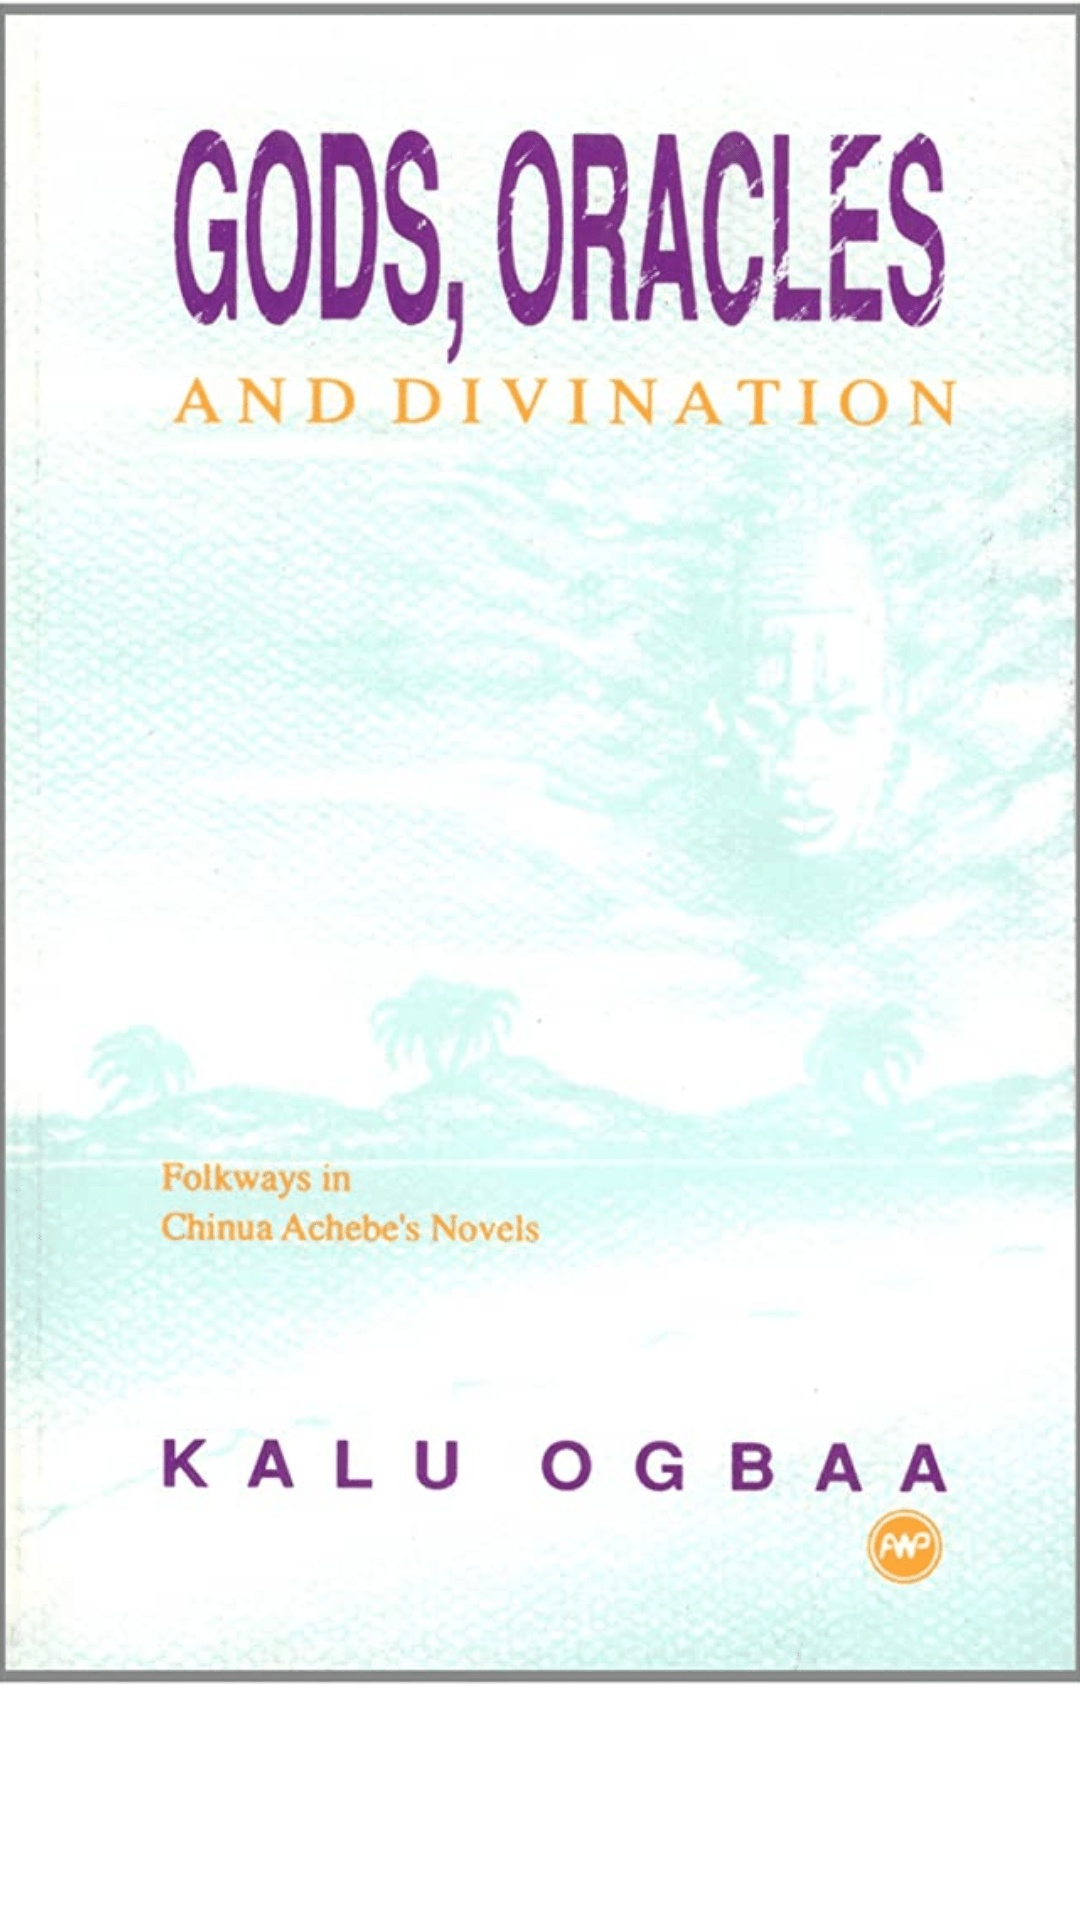 Gods, Oracles, and Divination: Folkways in Chinua Achebe's Novels